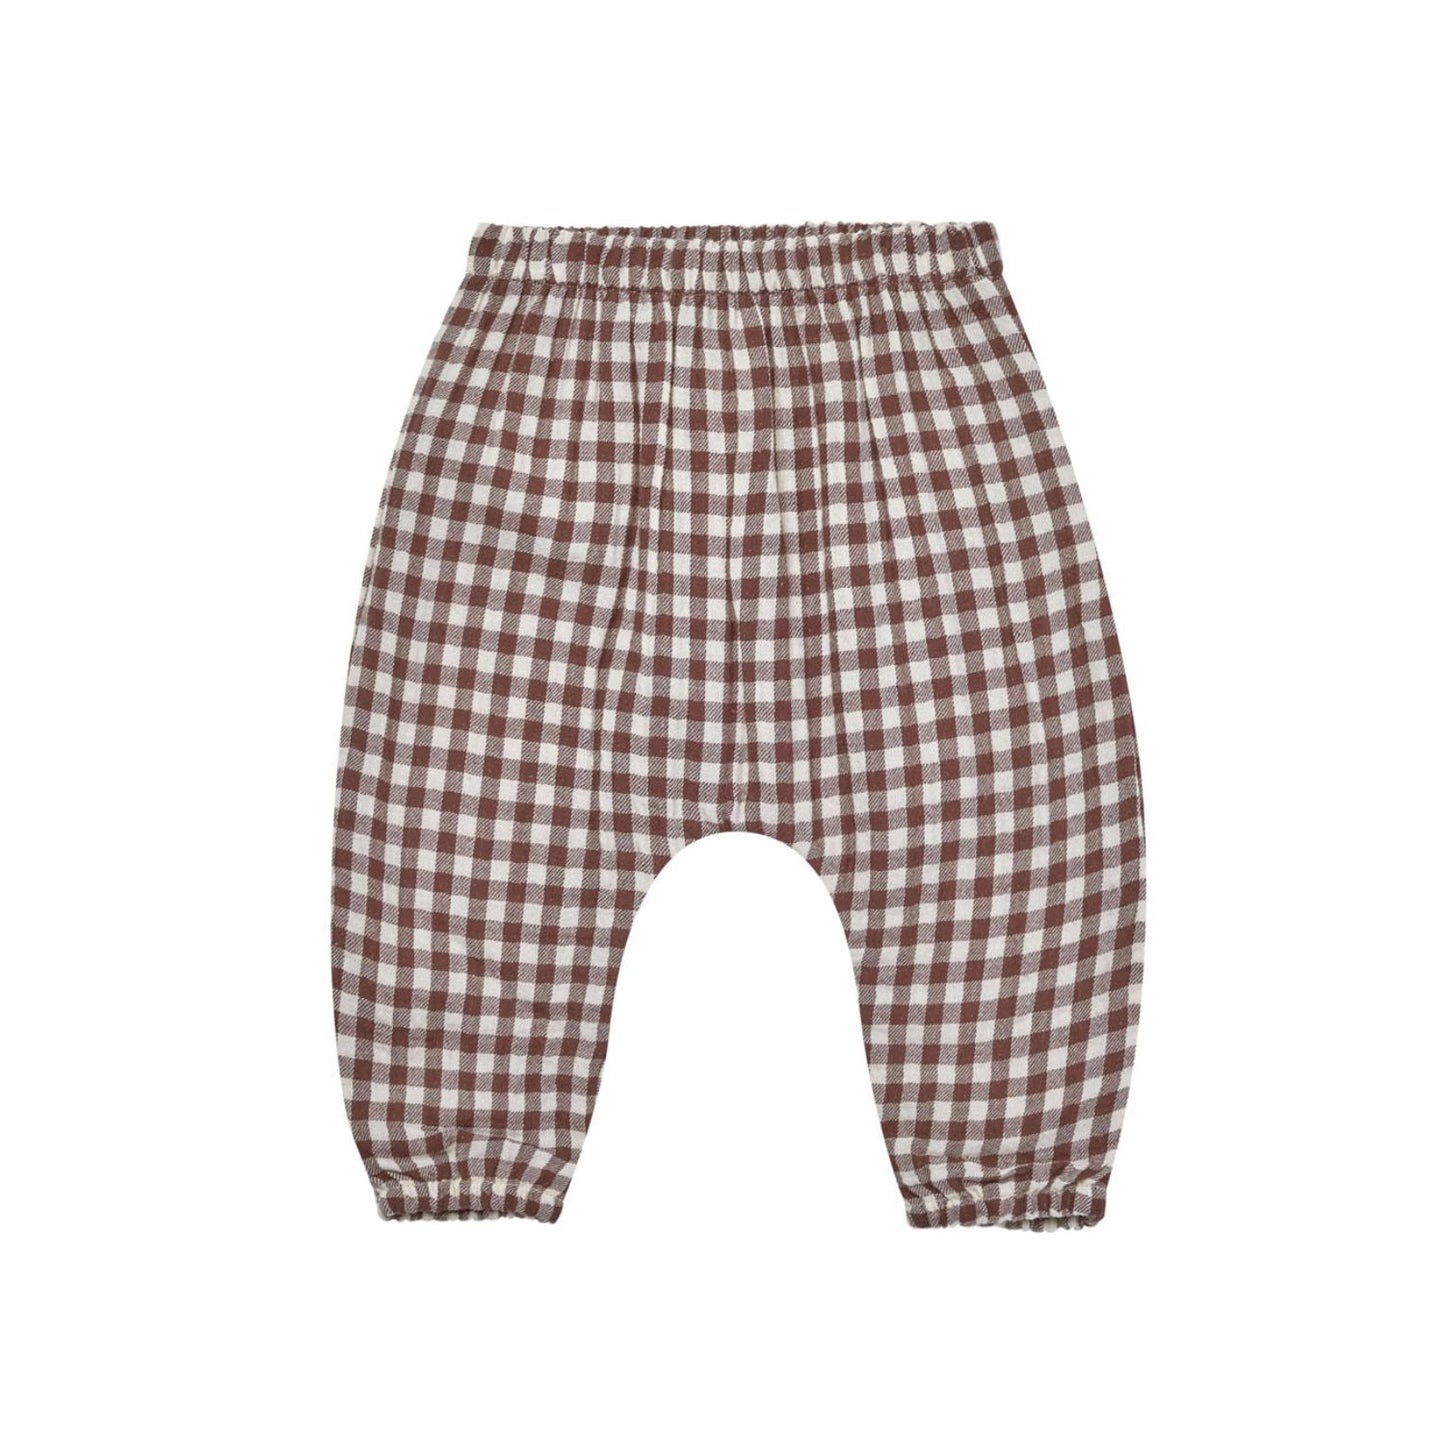 Quincy Mae Woven Pant - Plum Gingham